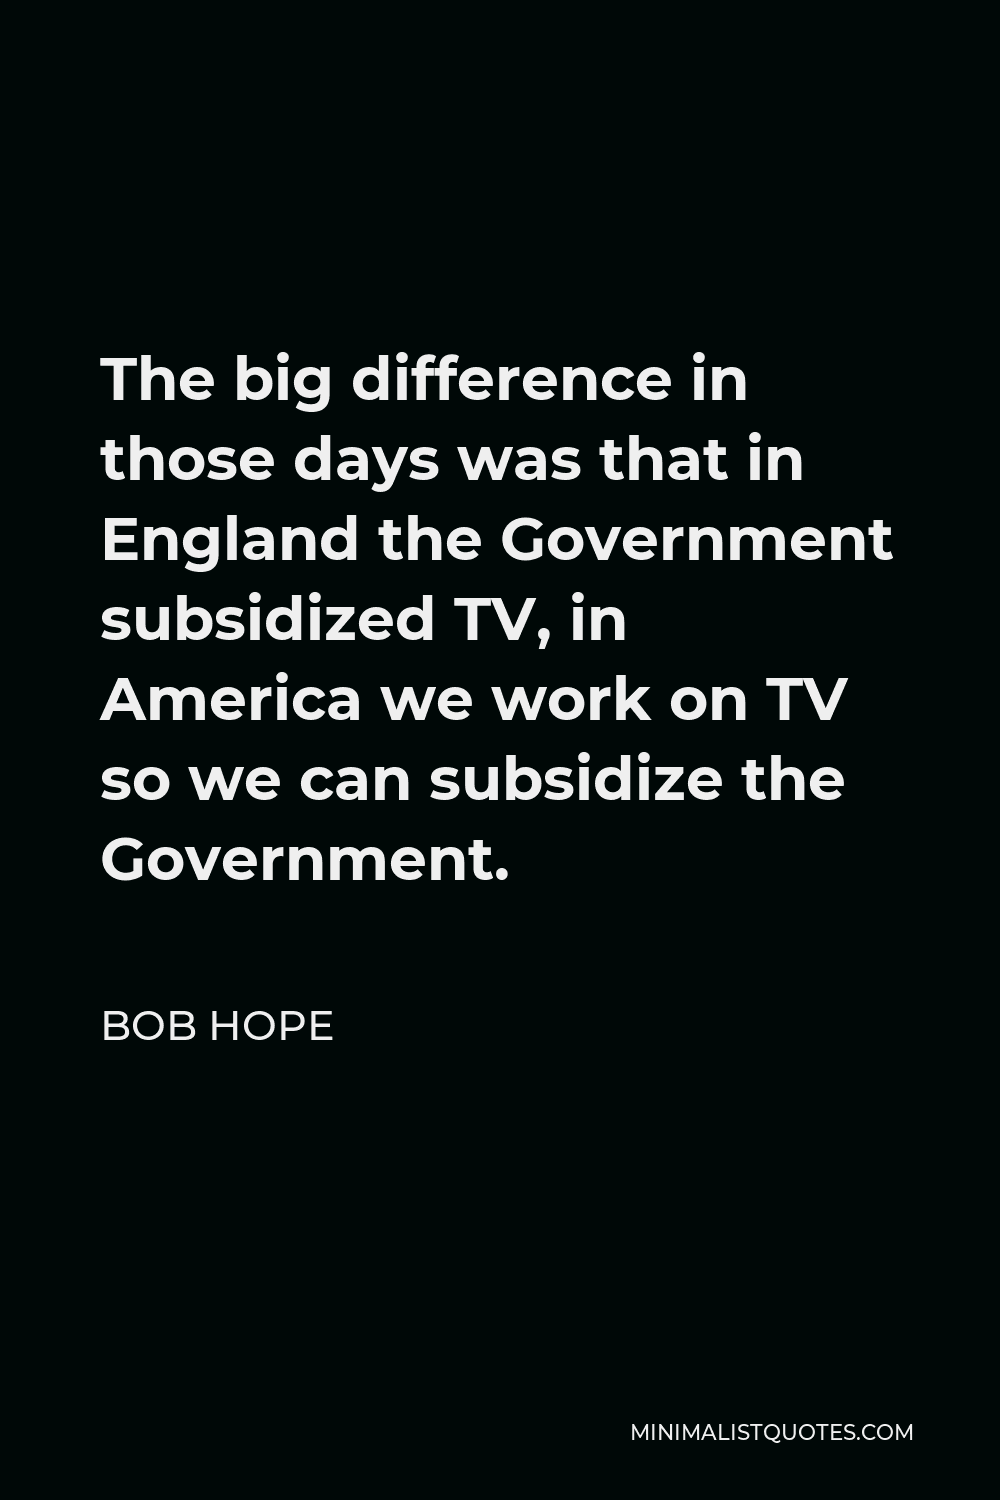 Bob Hope Quote - The big difference in those days was that in England the Government subsidized TV, in America we work on TV so we can subsidize the Government.